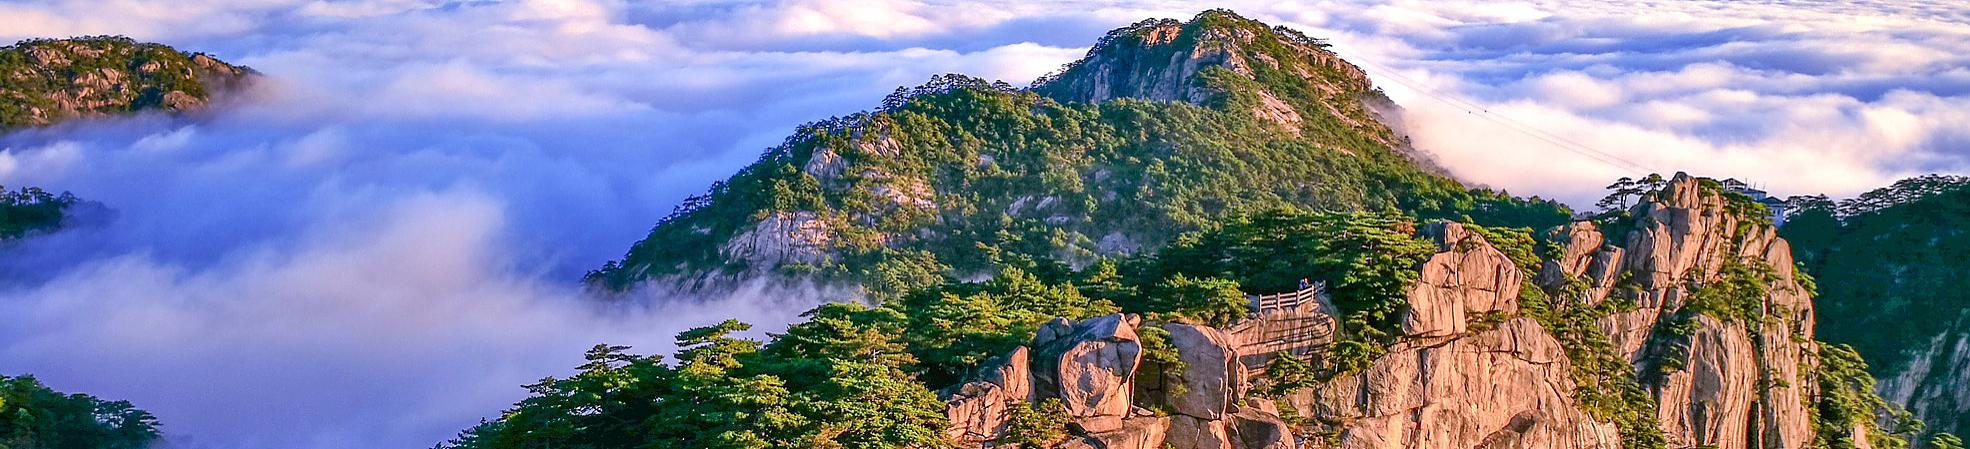 Attractions Around Huangshan Mountain